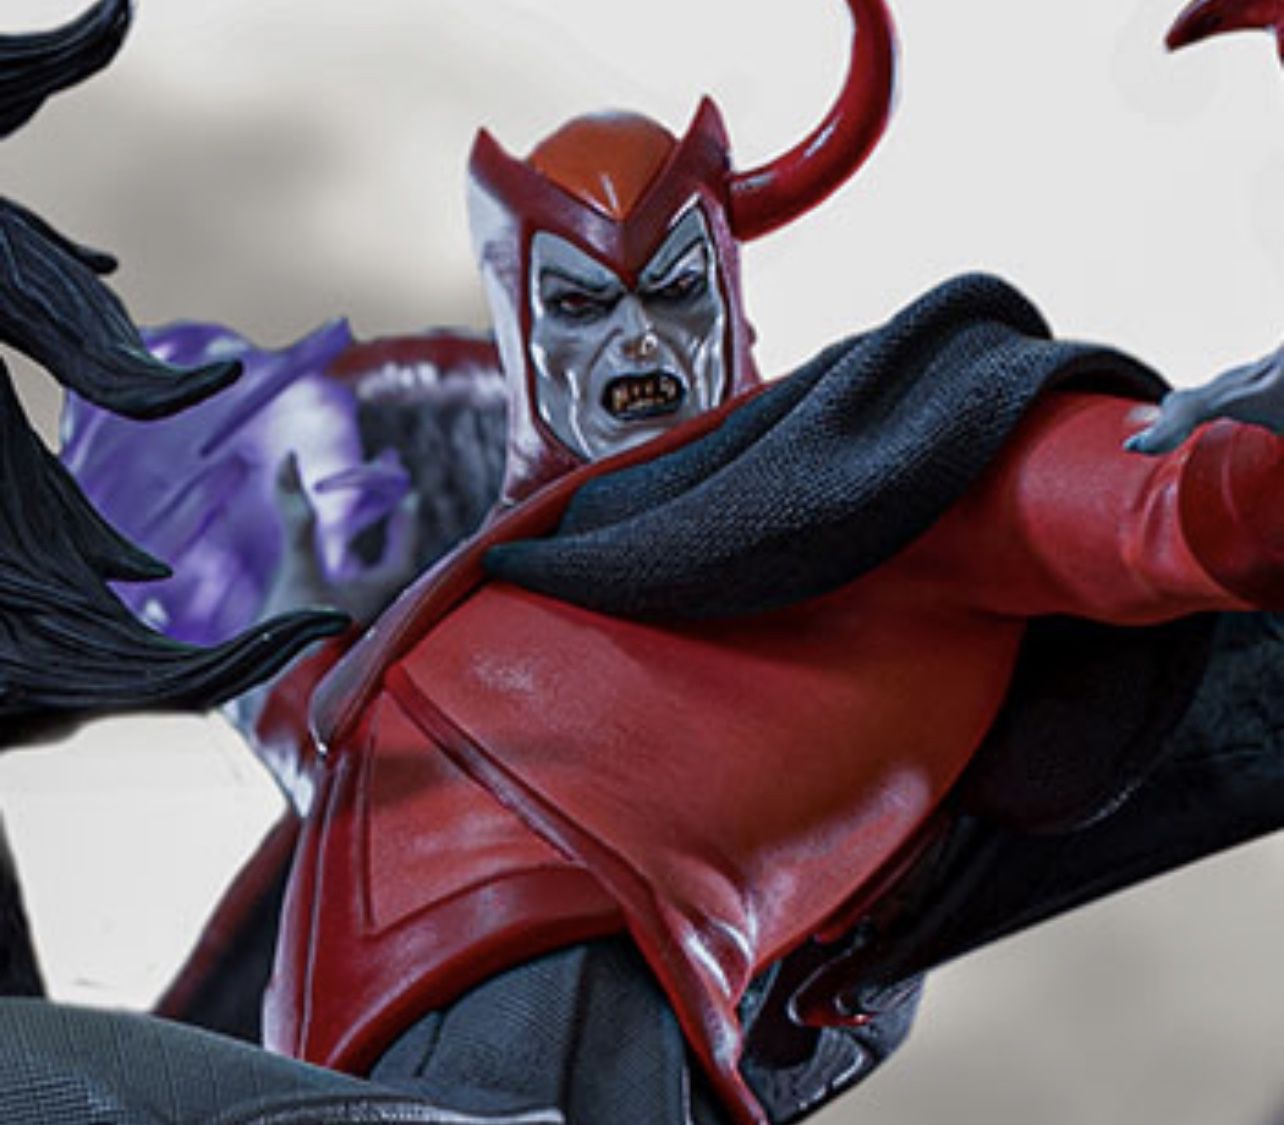 Dungeons & Dragons Venger with Nightmare & Shadow Demon Deluxe Statue